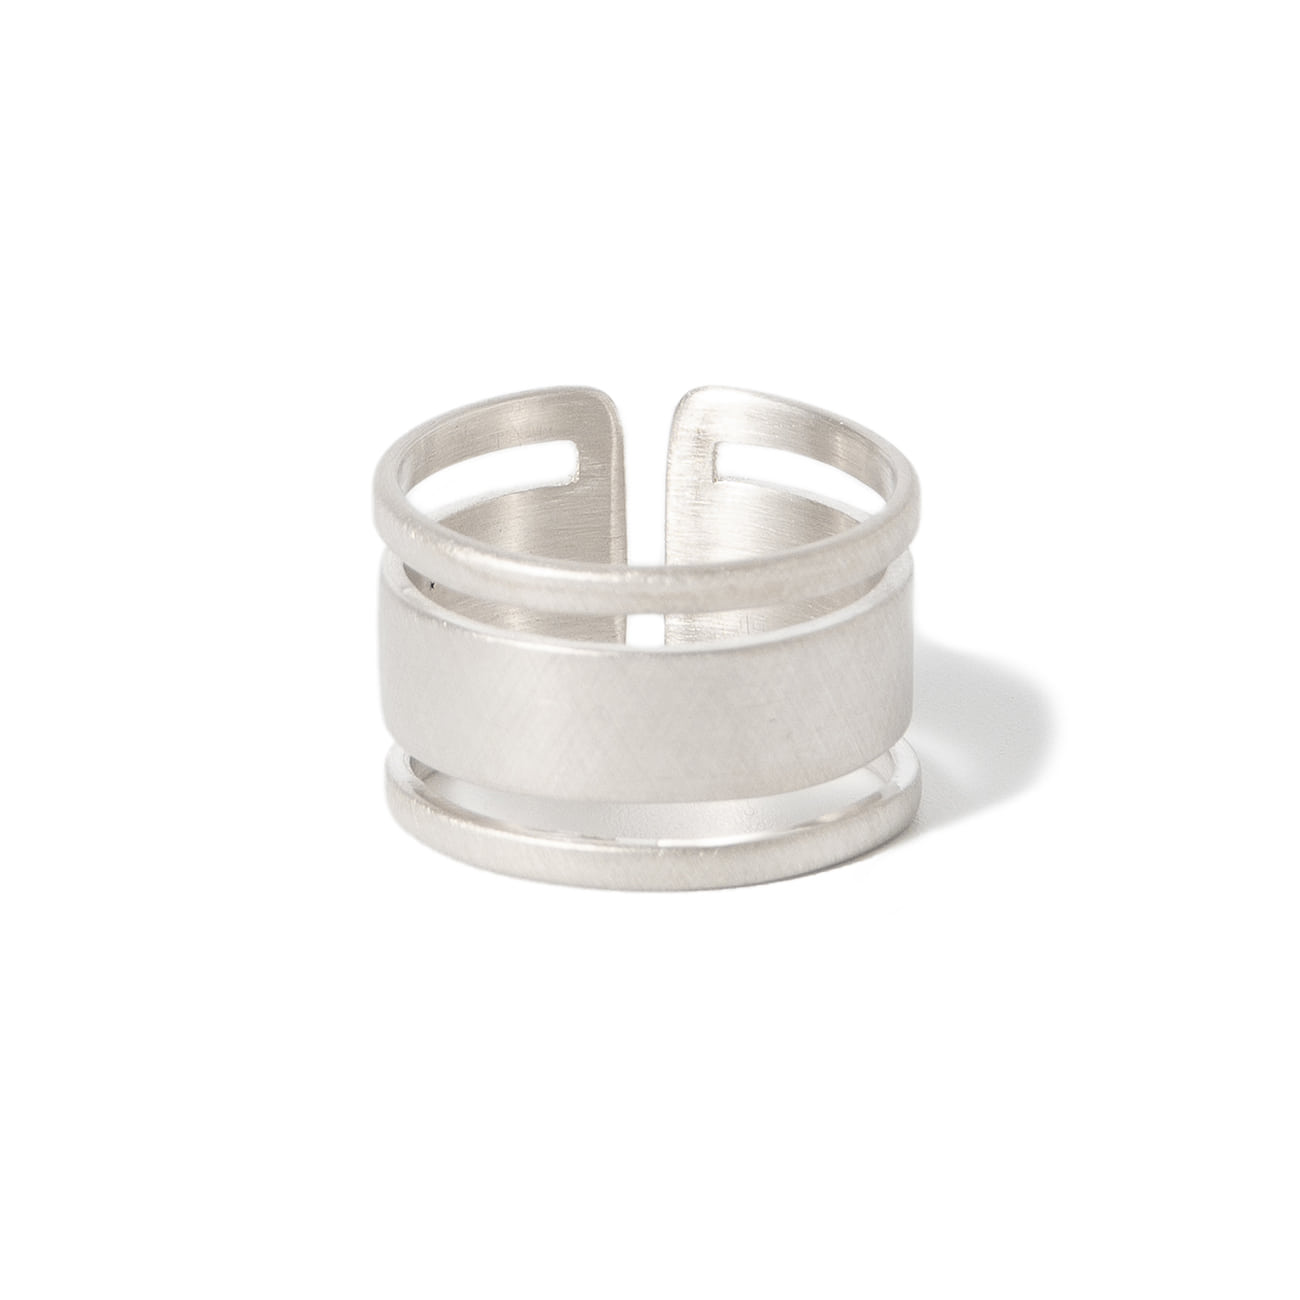 ADD SILHOUETTE 925 SILVER RING LINE #2